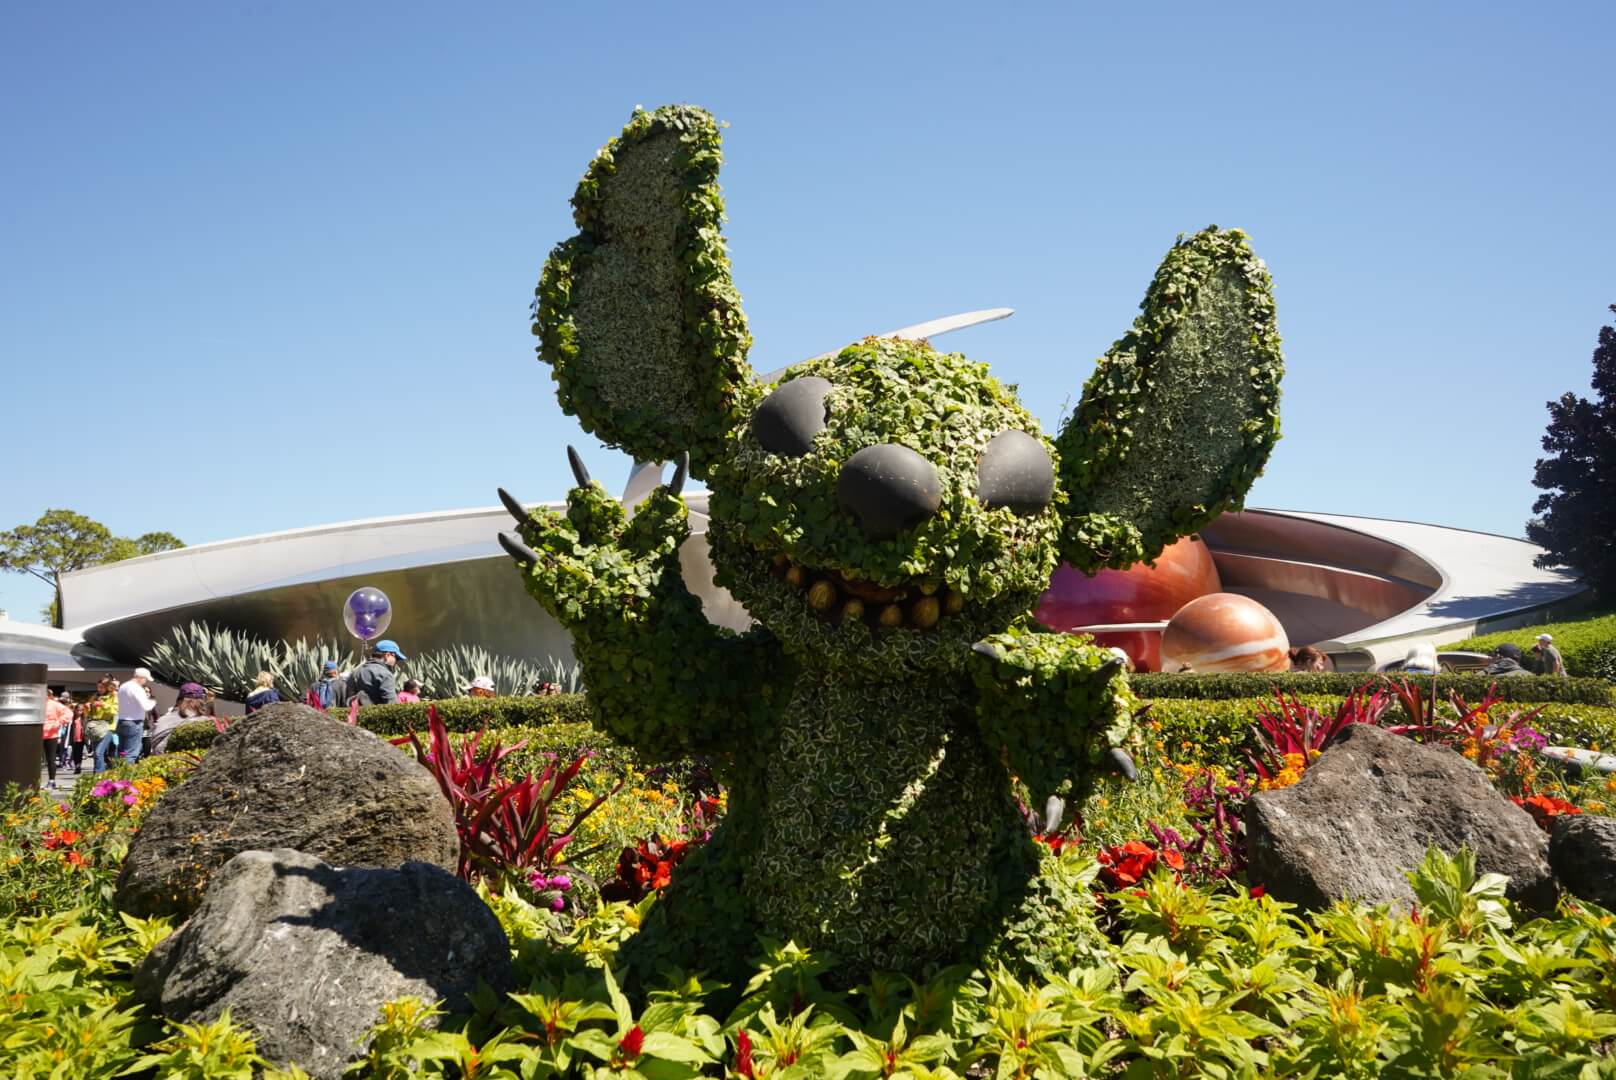 Best Food & Things to Do at Epcot’s Flower & Garden Festival 2019